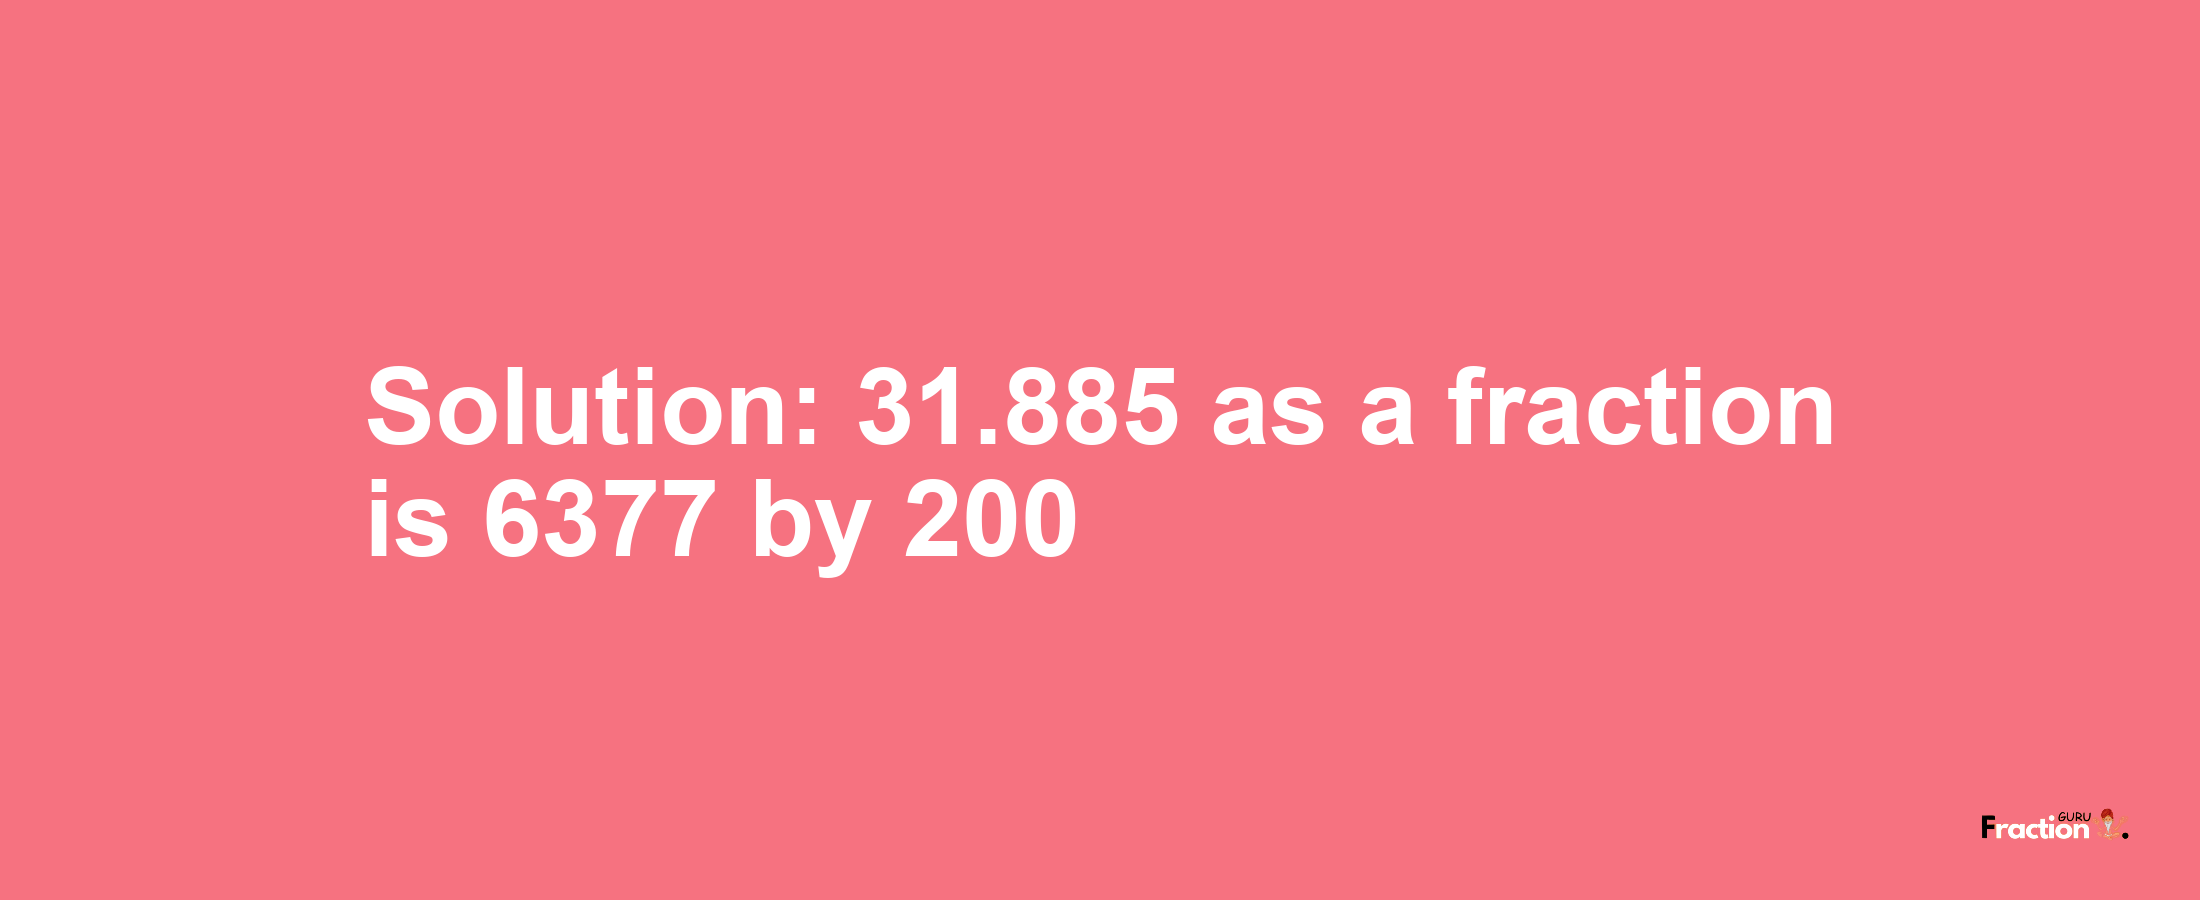 Solution:31.885 as a fraction is 6377/200